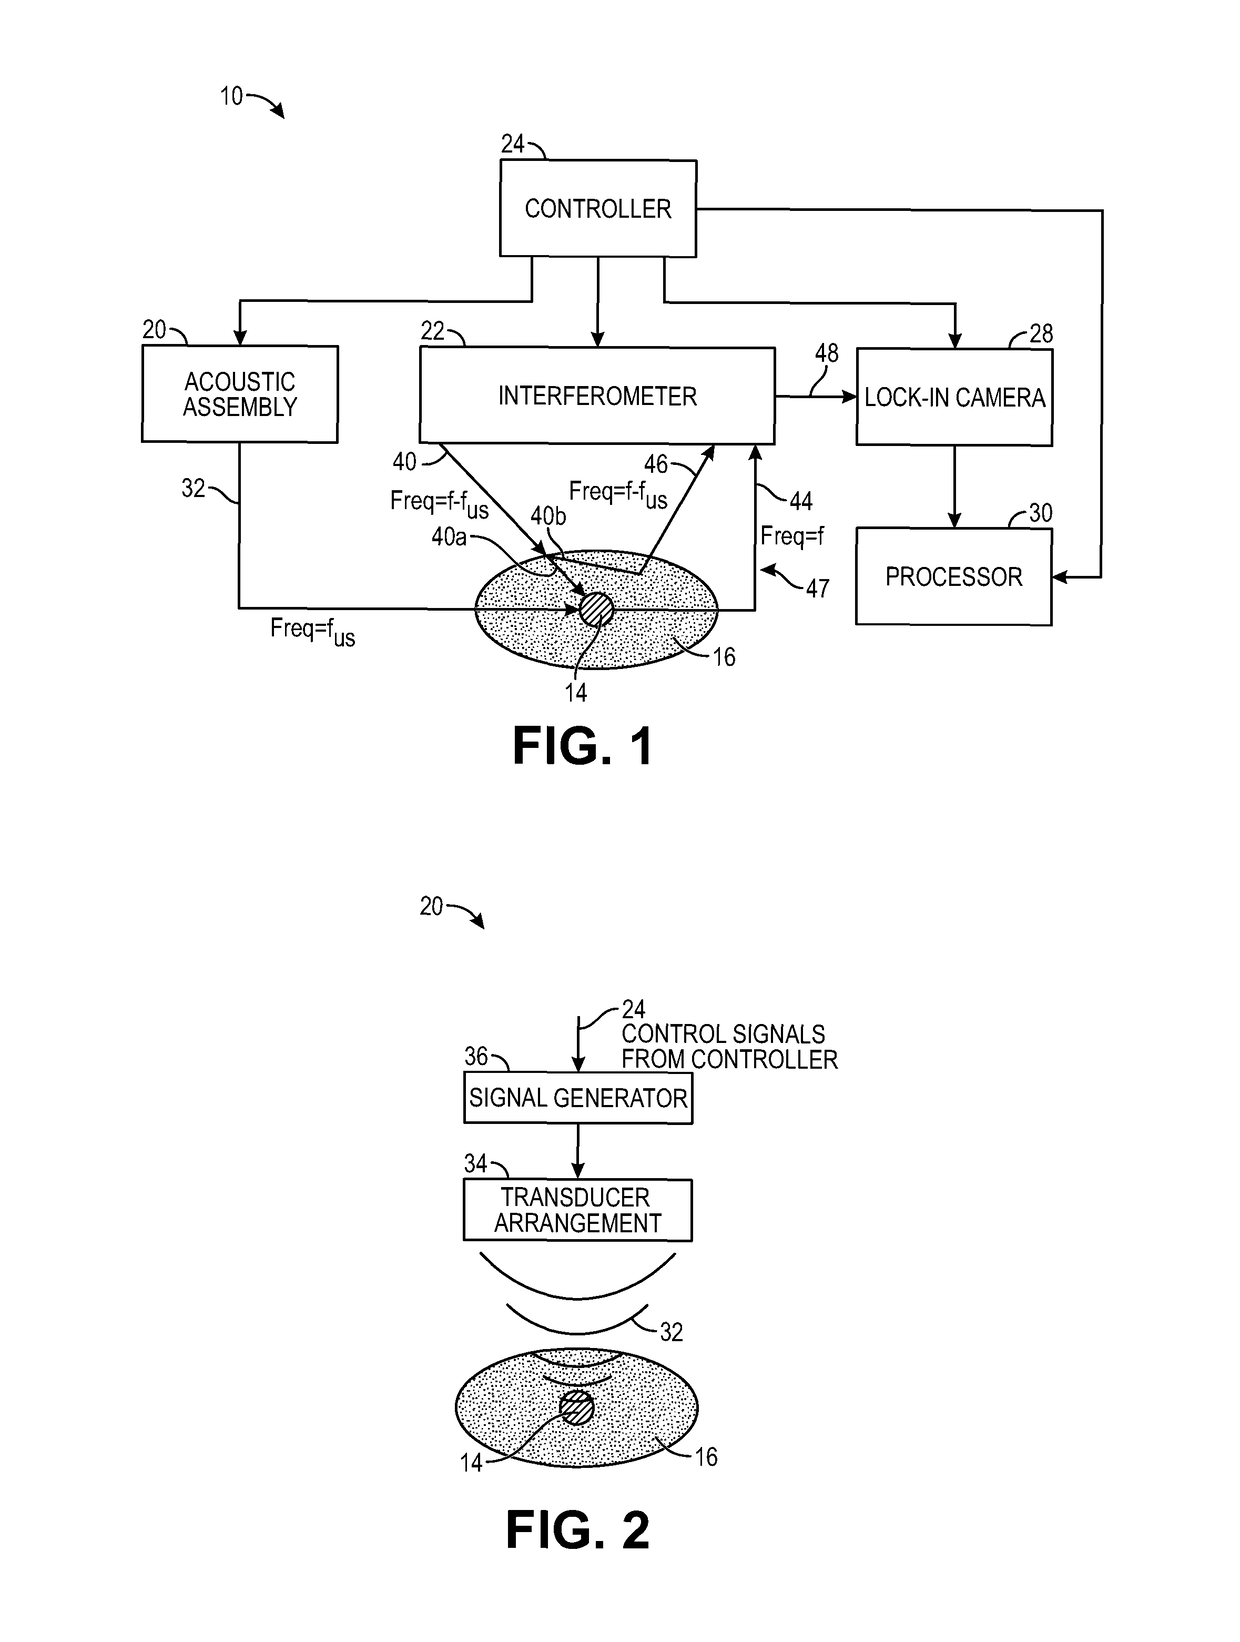 System and method for simultaneously detecting phase modulated optical signals